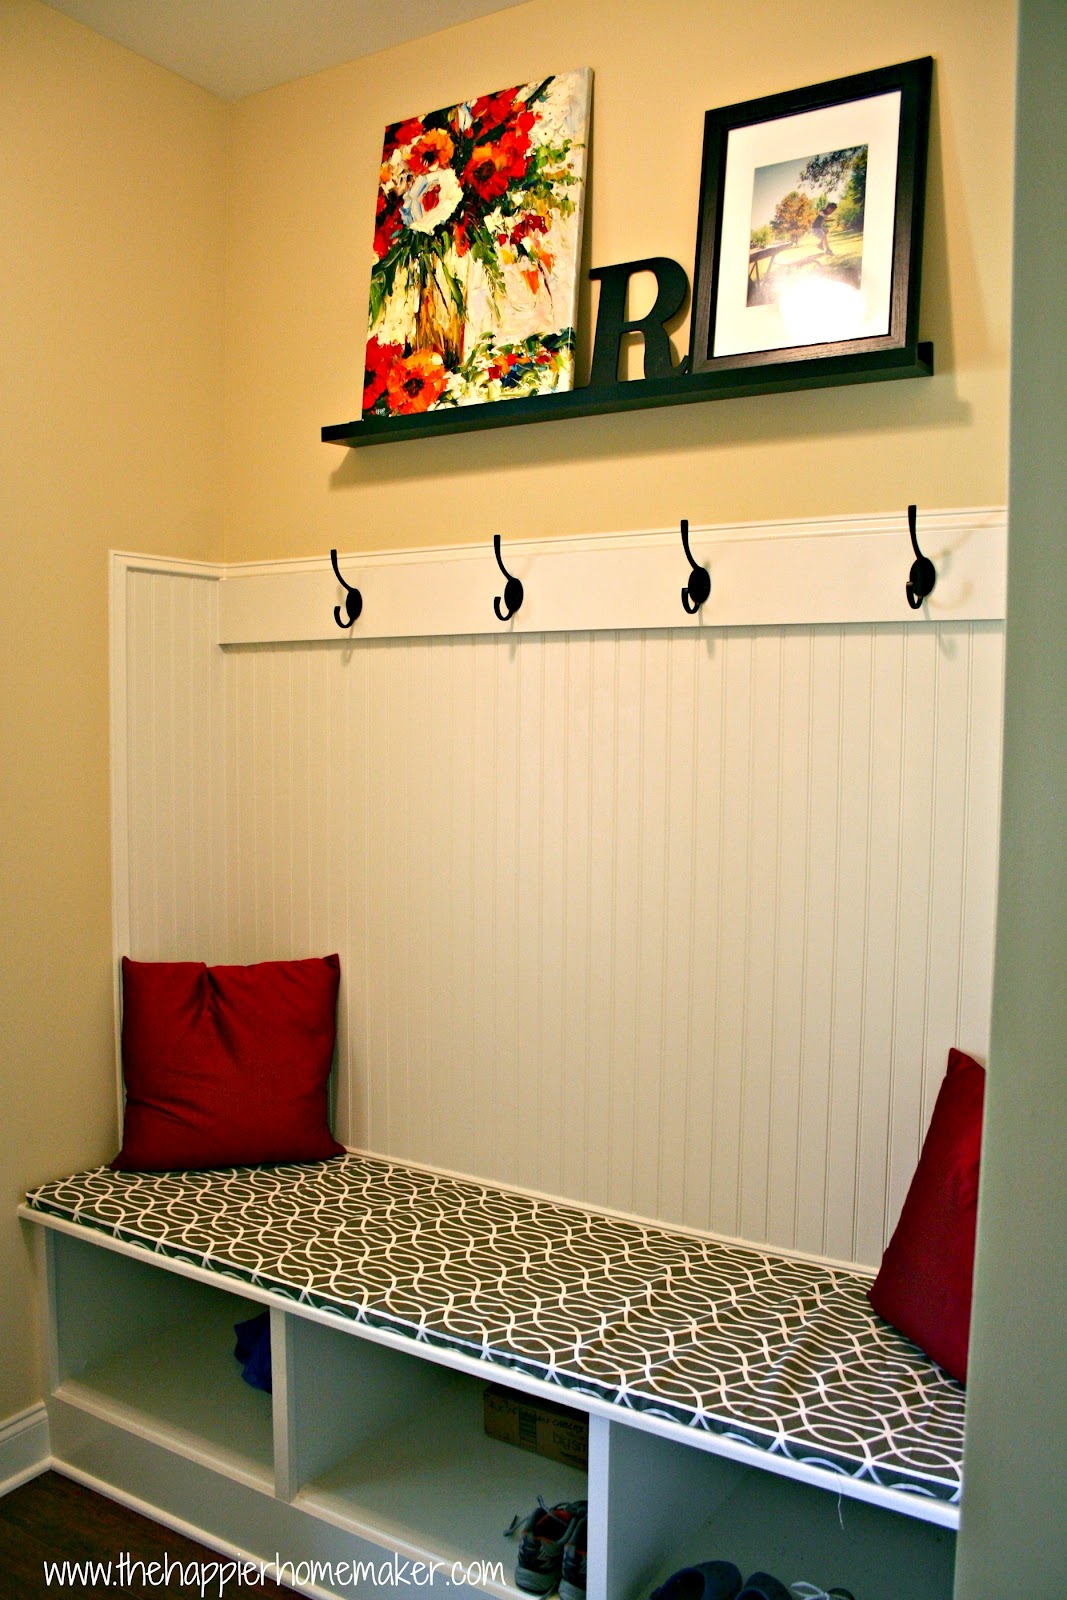 Fast Diy No Sew Bench Cushion Without Plywood The Happier Homemaker